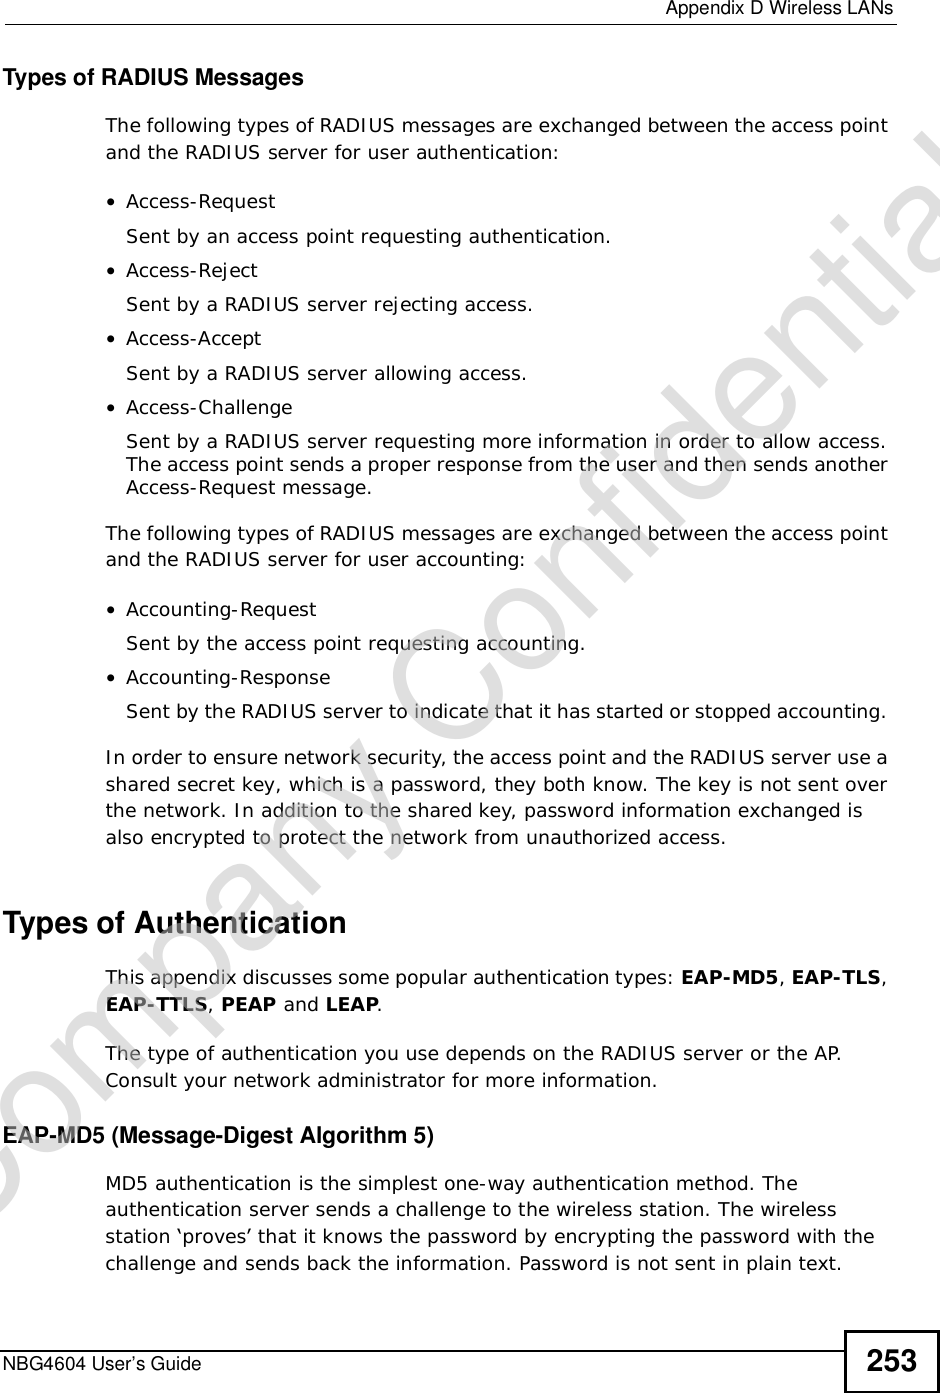  Appendix DWireless LANsNBG4604 User’s Guide 253Types of RADIUS MessagesThe following types of RADIUS messages are exchanged between the access point and the RADIUS server for user authentication:•Access-RequestSent by an access point requesting authentication.•Access-RejectSent by a RADIUS server rejecting access.•Access-AcceptSent by a RADIUS server allowing access. •Access-ChallengeSent by a RADIUS server requesting more information in order to allow access. The access point sends a proper response from the user and then sends another Access-Request message. The following types of RADIUS messages are exchanged between the access point and the RADIUS server for user accounting:•Accounting-RequestSent by the access point requesting accounting.•Accounting-ResponseSent by the RADIUS server to indicate that it has started or stopped accounting. In order to ensure network security, the access point and the RADIUS server use a shared secret key, which is a password, they both know. The key is not sent over the network. In addition to the shared key, password information exchanged is also encrypted to protect the network from unauthorized access. Types of Authentication This appendix discusses some popular authentication types: EAP-MD5,EAP-TLS,EAP-TTLS,PEAP and LEAP.The type of authentication you use depends on the RADIUS server or the AP. Consult your network administrator for more information.EAP-MD5 (Message-Digest Algorithm 5)MD5 authentication is the simplest one-way authentication method. The authentication server sends a challenge to the wireless station. The wireless station ‘proves’ that it knows the password by encrypting the password with the challenge and sends back the information. Password is not sent in plain text. Company Confidential